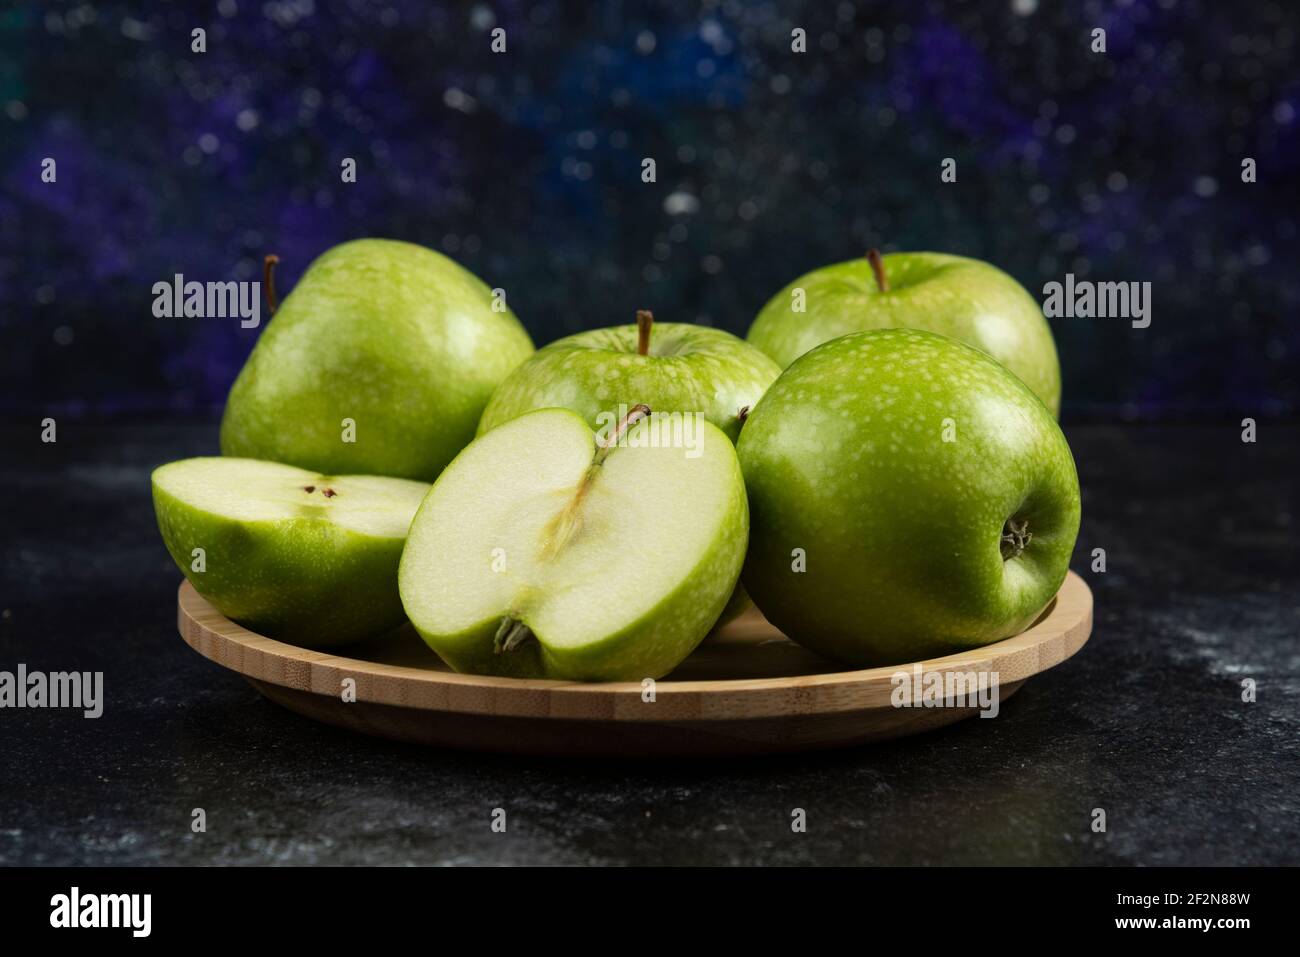 Whole and sliced ripe green apples on wooden plate Stock Photo